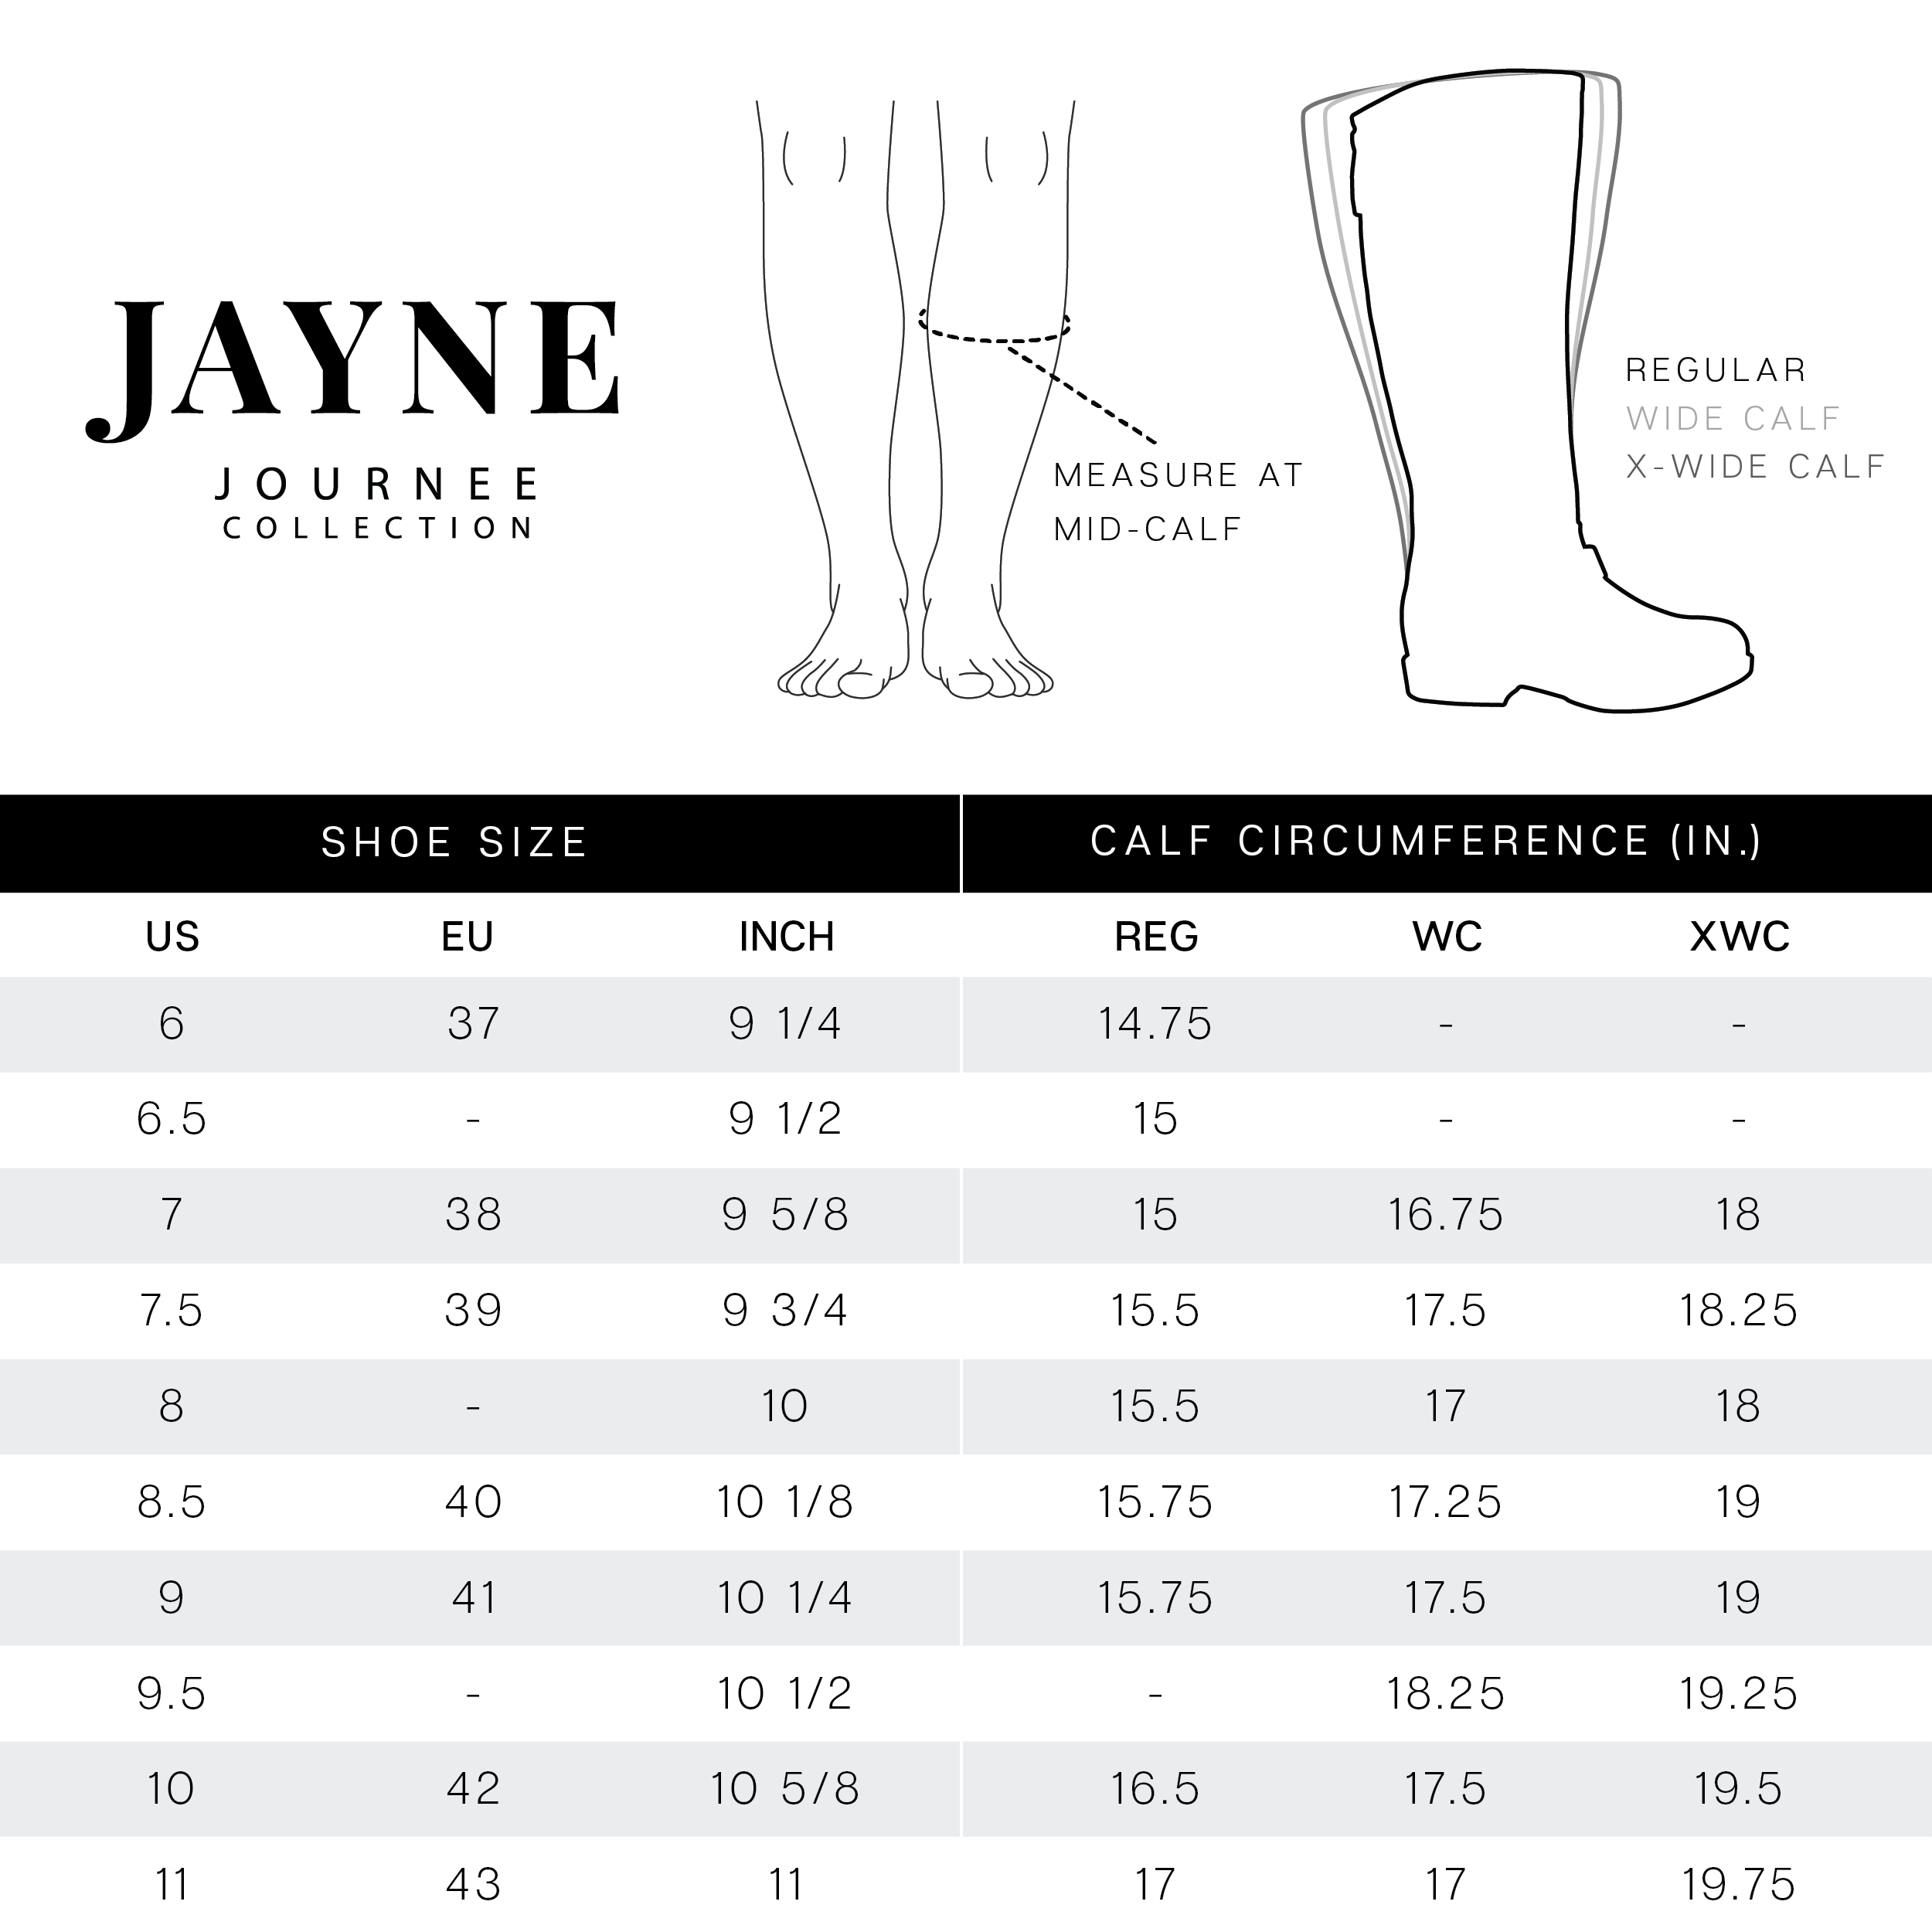 JAYNE EXTRA WIDE CALF - Journee Collection